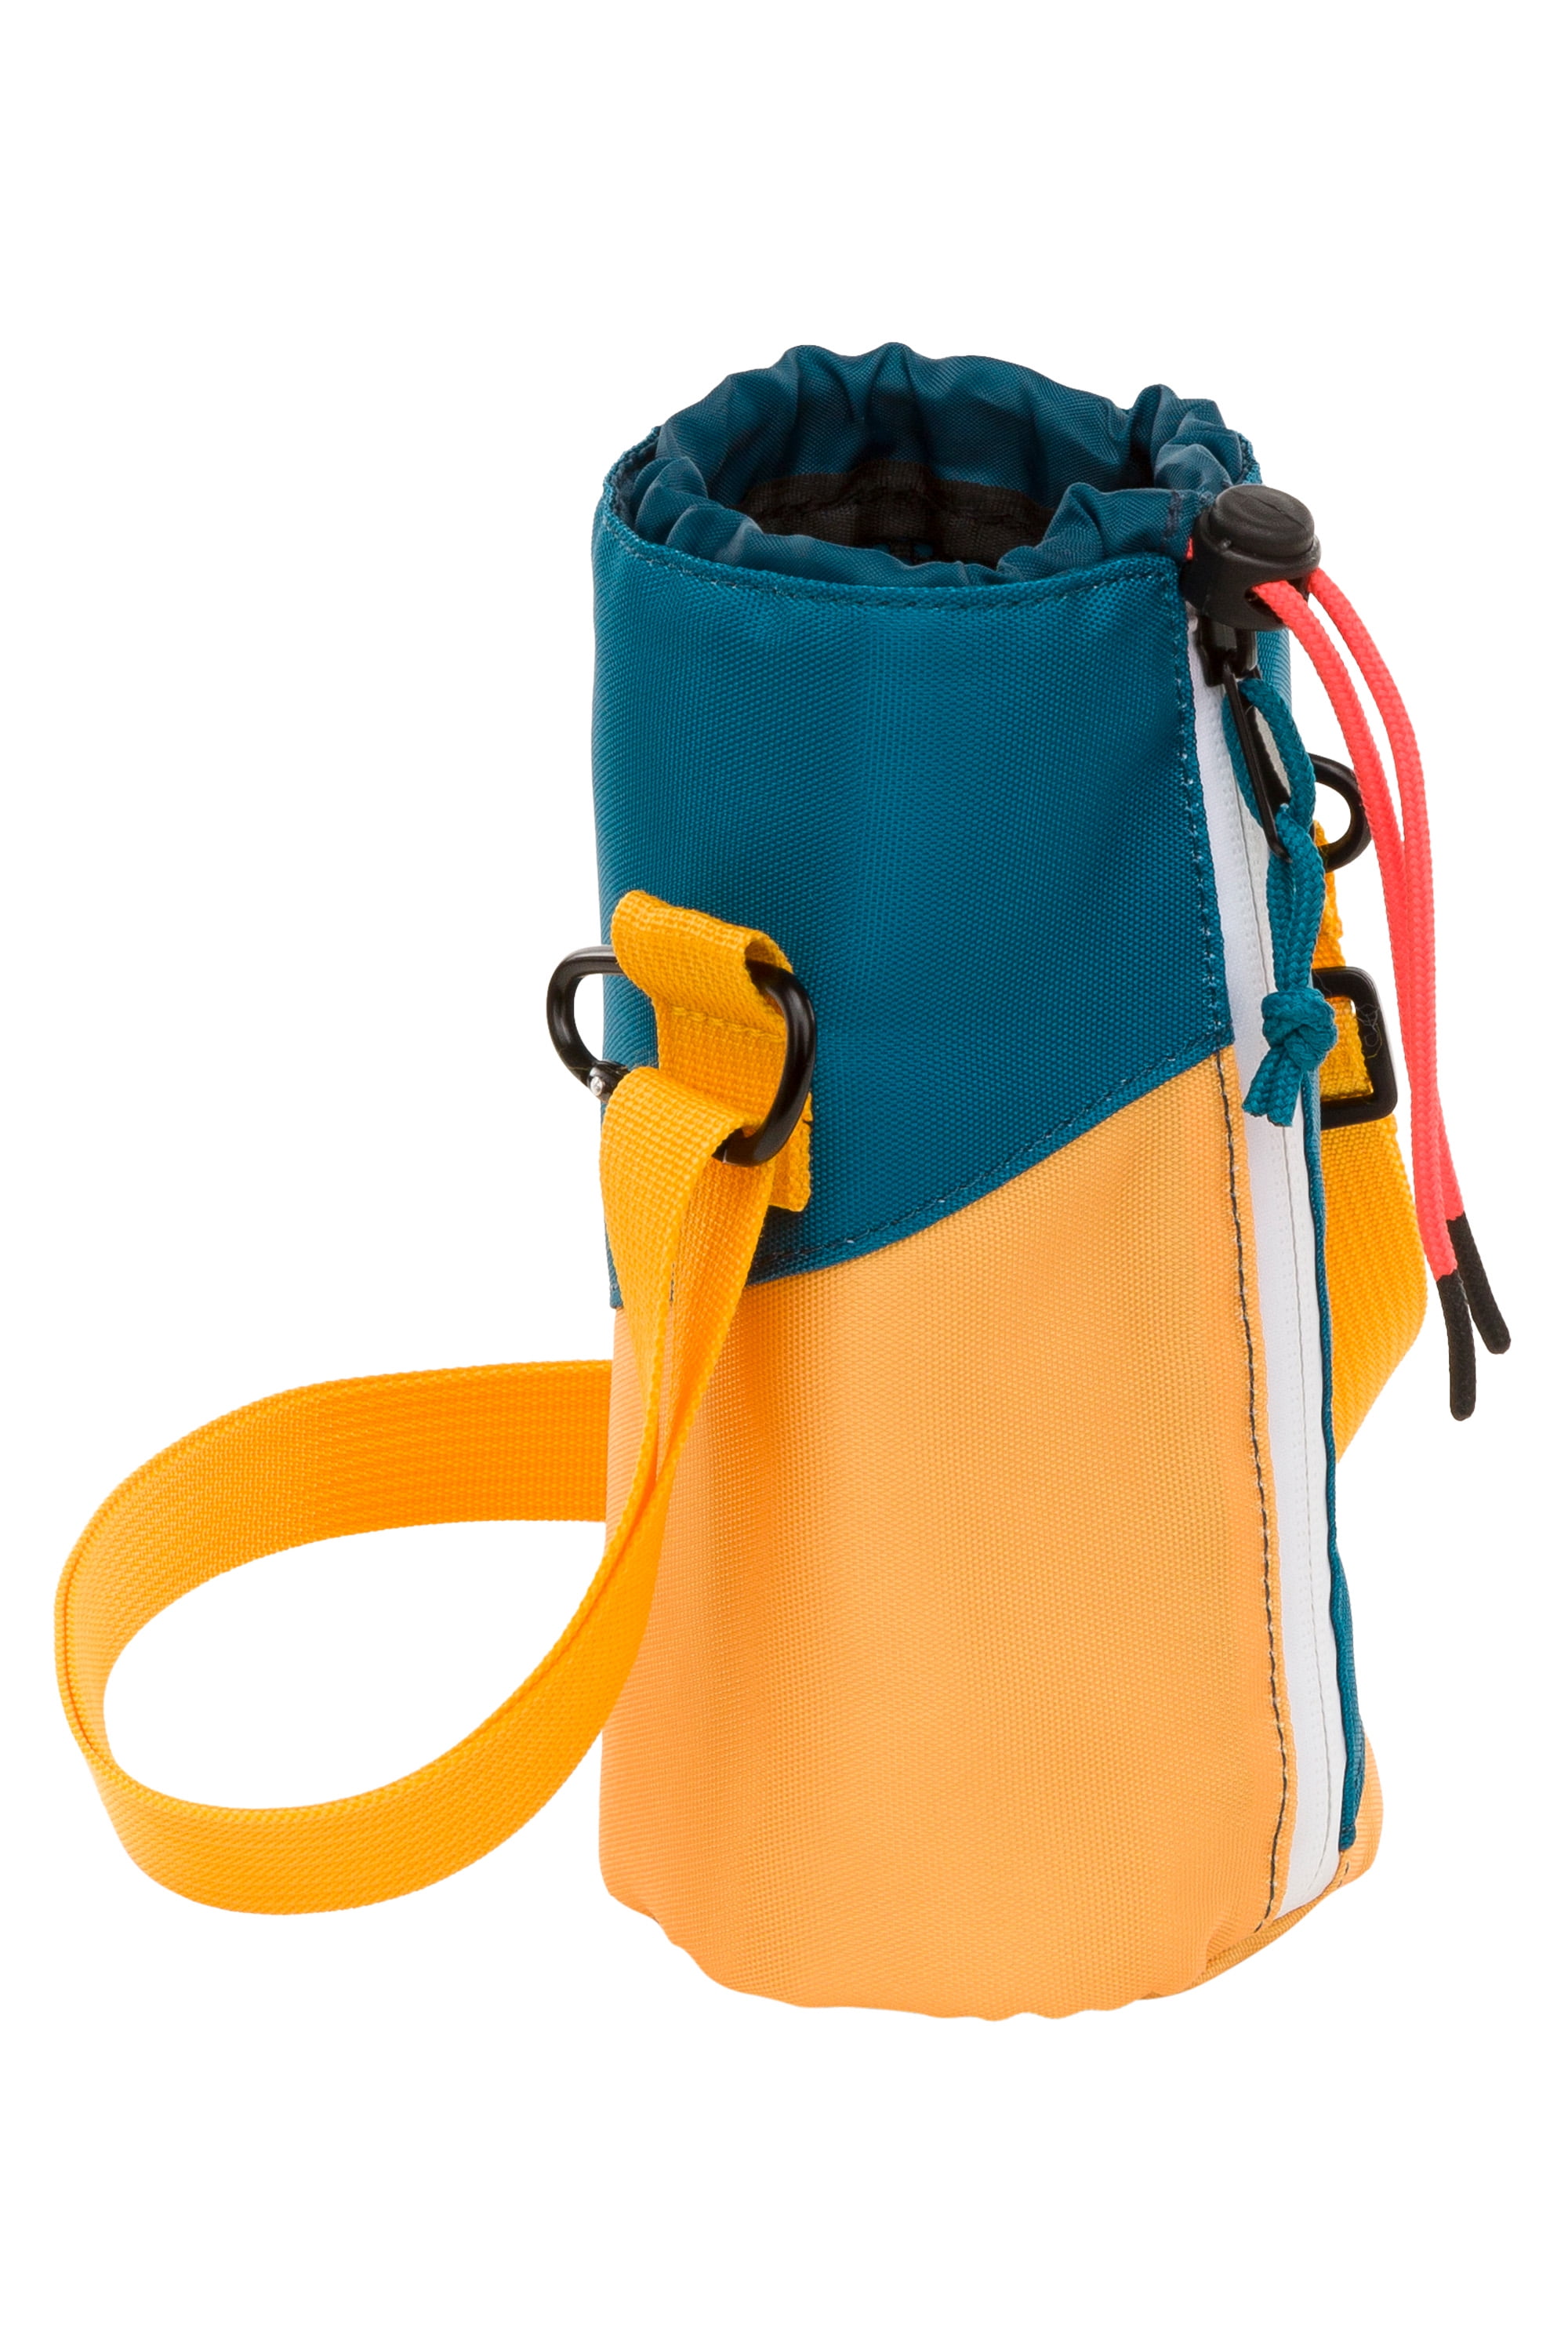 AAA.com  AquaPockets Water Bottle Carrier by Smooth Trip